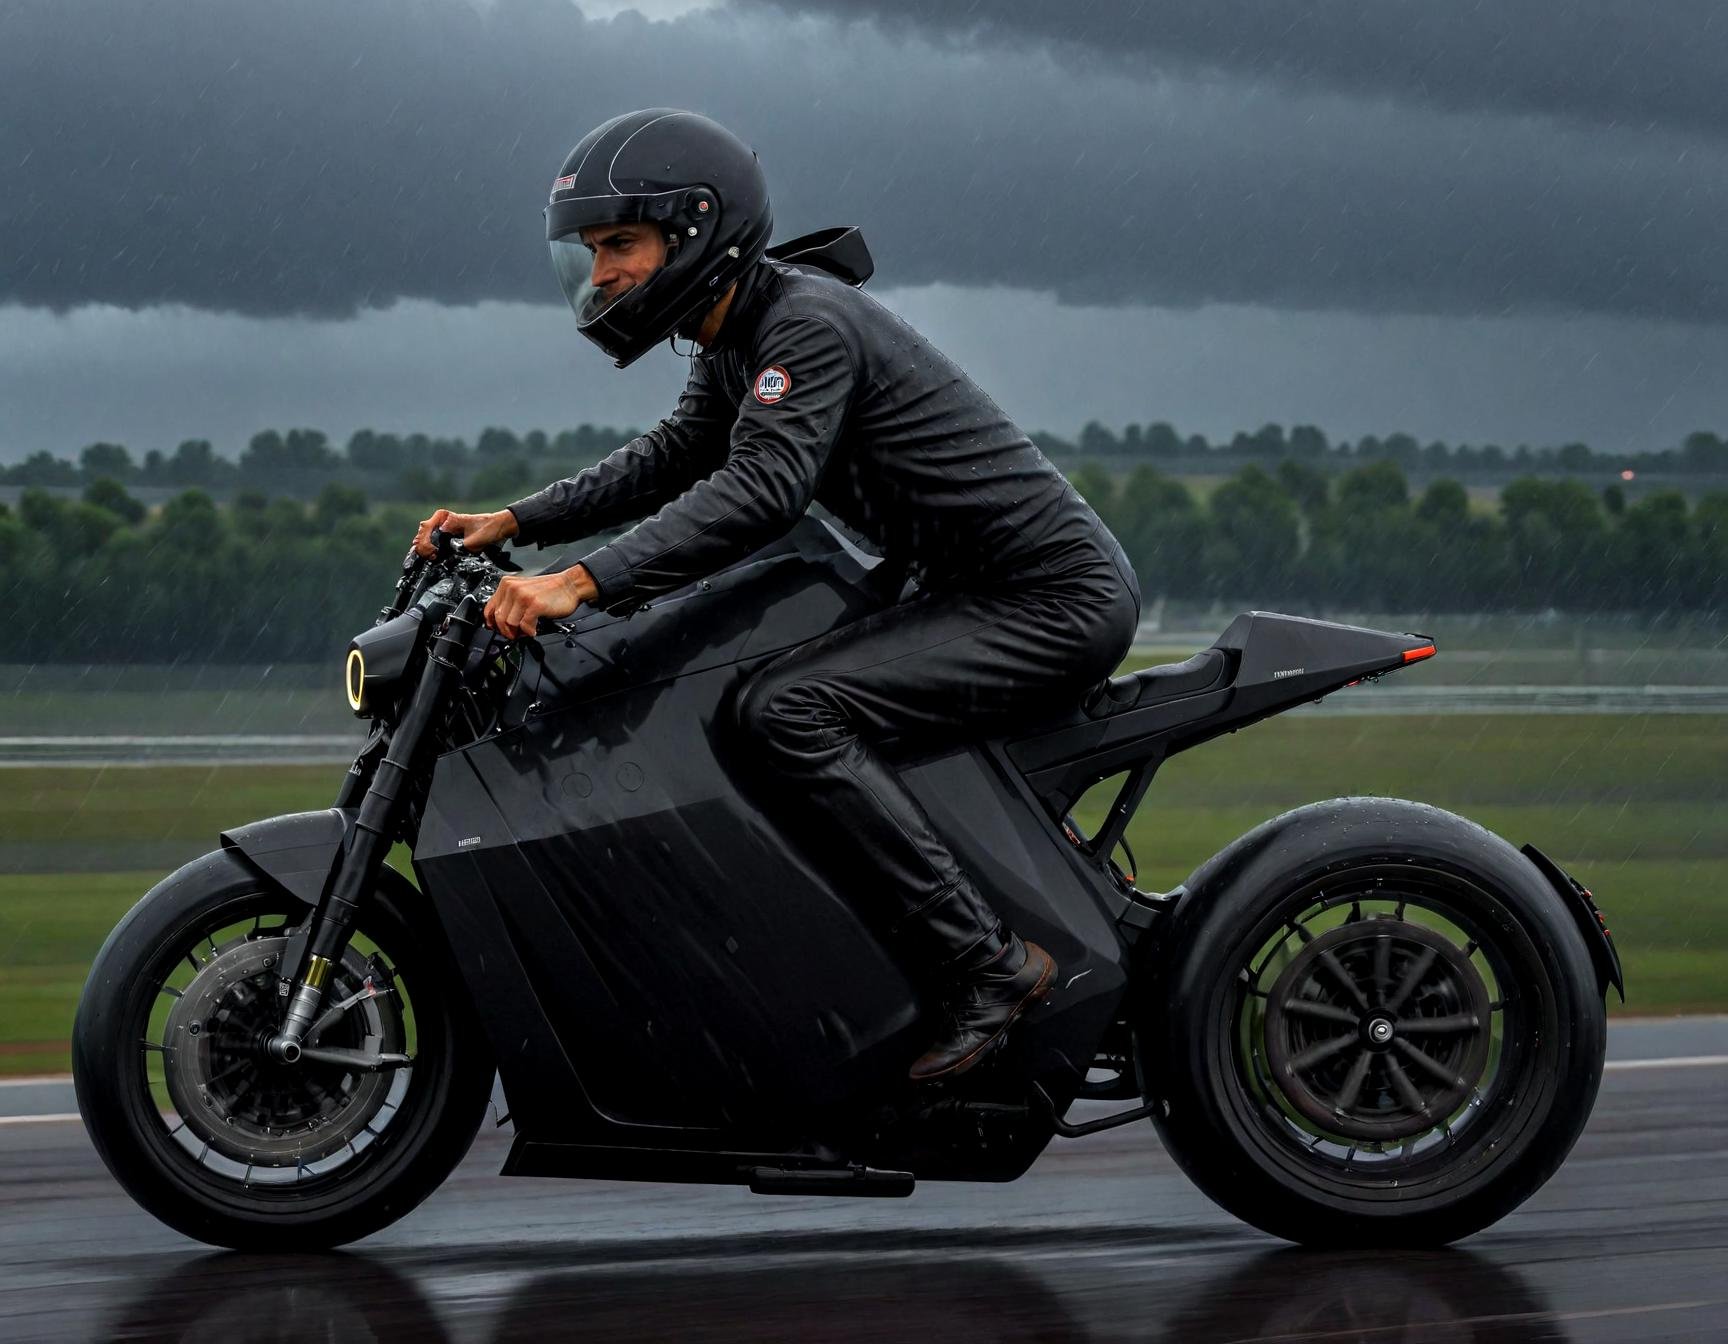 he is rideing the dc100 at a raceway, black racingsuite, raining, thunderstorm ,(dc100:1.05), hyperrealistic, photo,